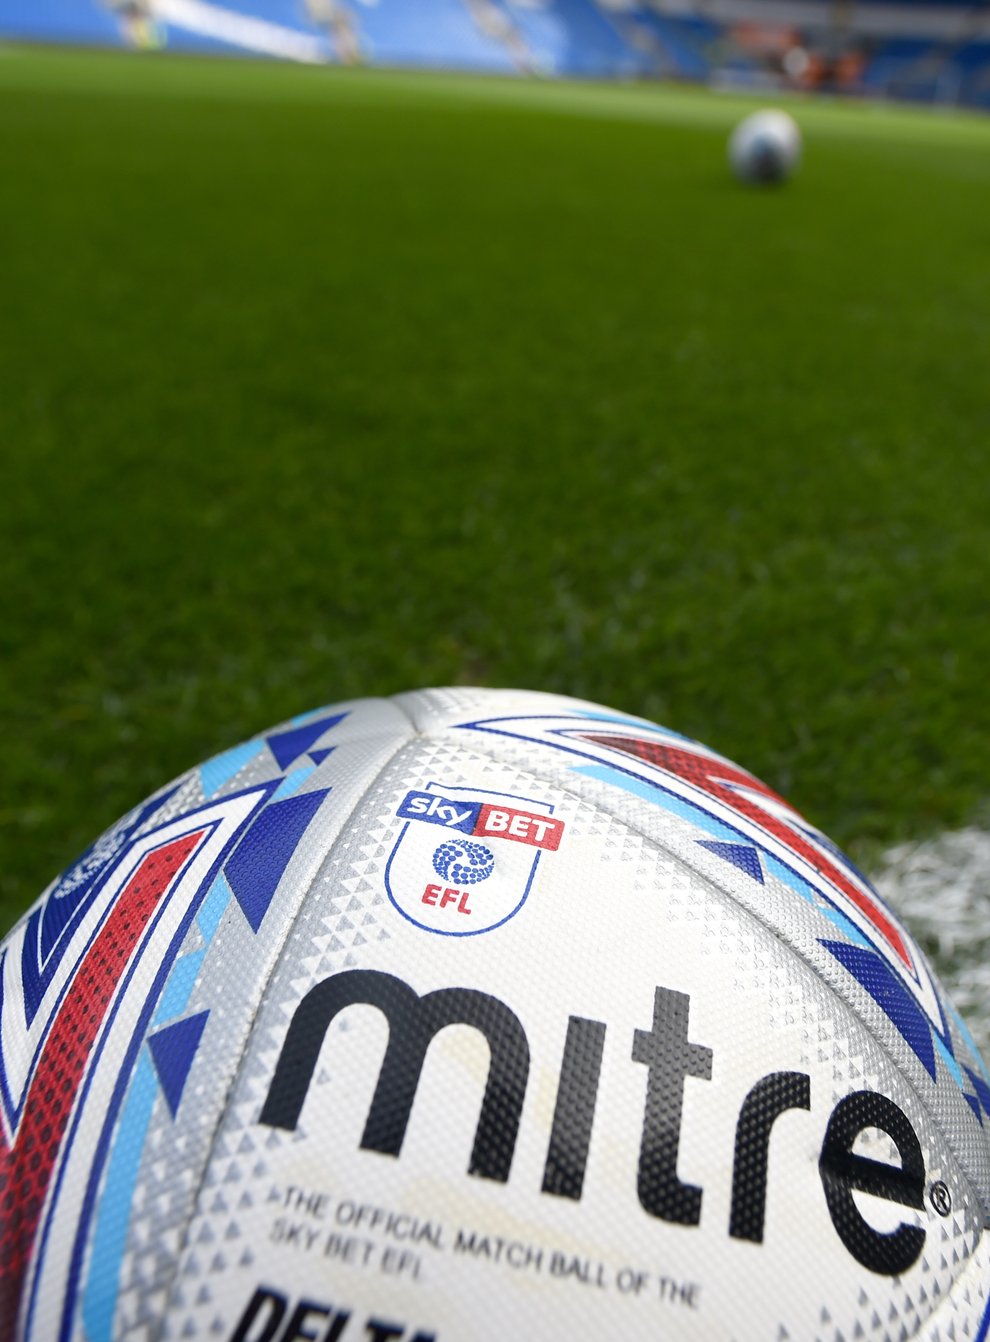 A general view of a official mitre matchball of the Sky Bet EFL